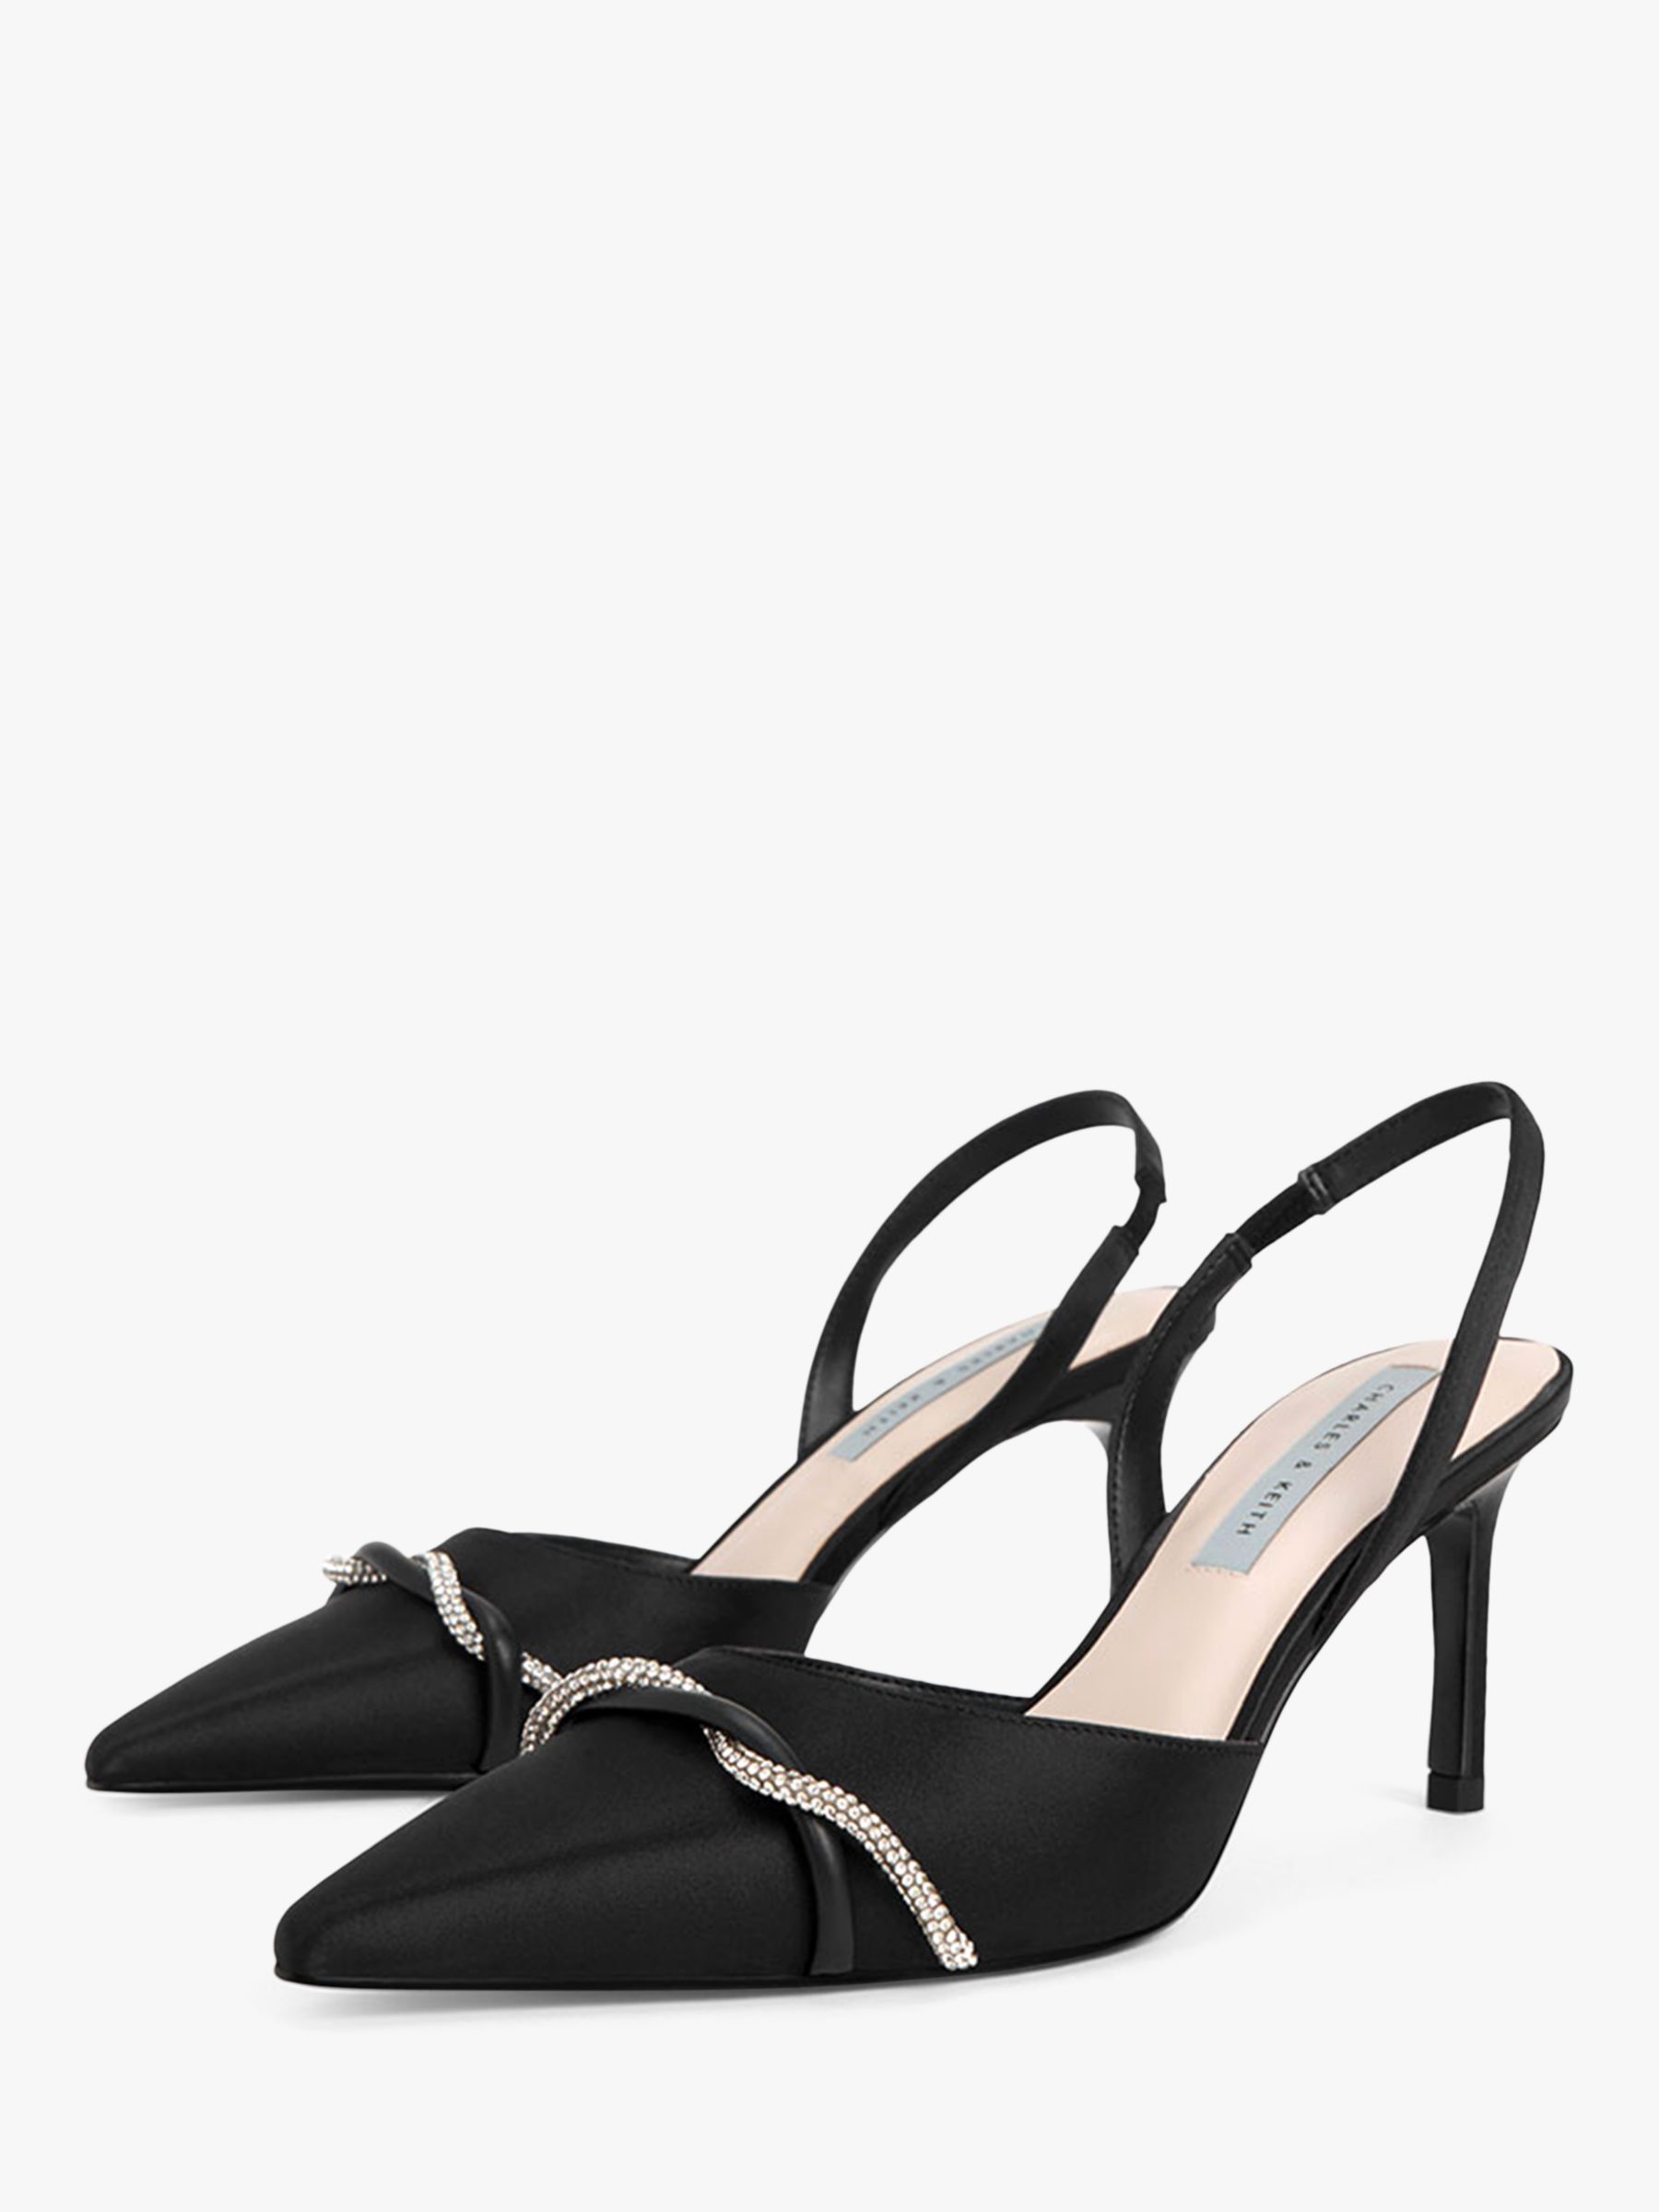 CHARLES & KEITH Satin Slingback Court Shoes, Black at John Lewis & Partners